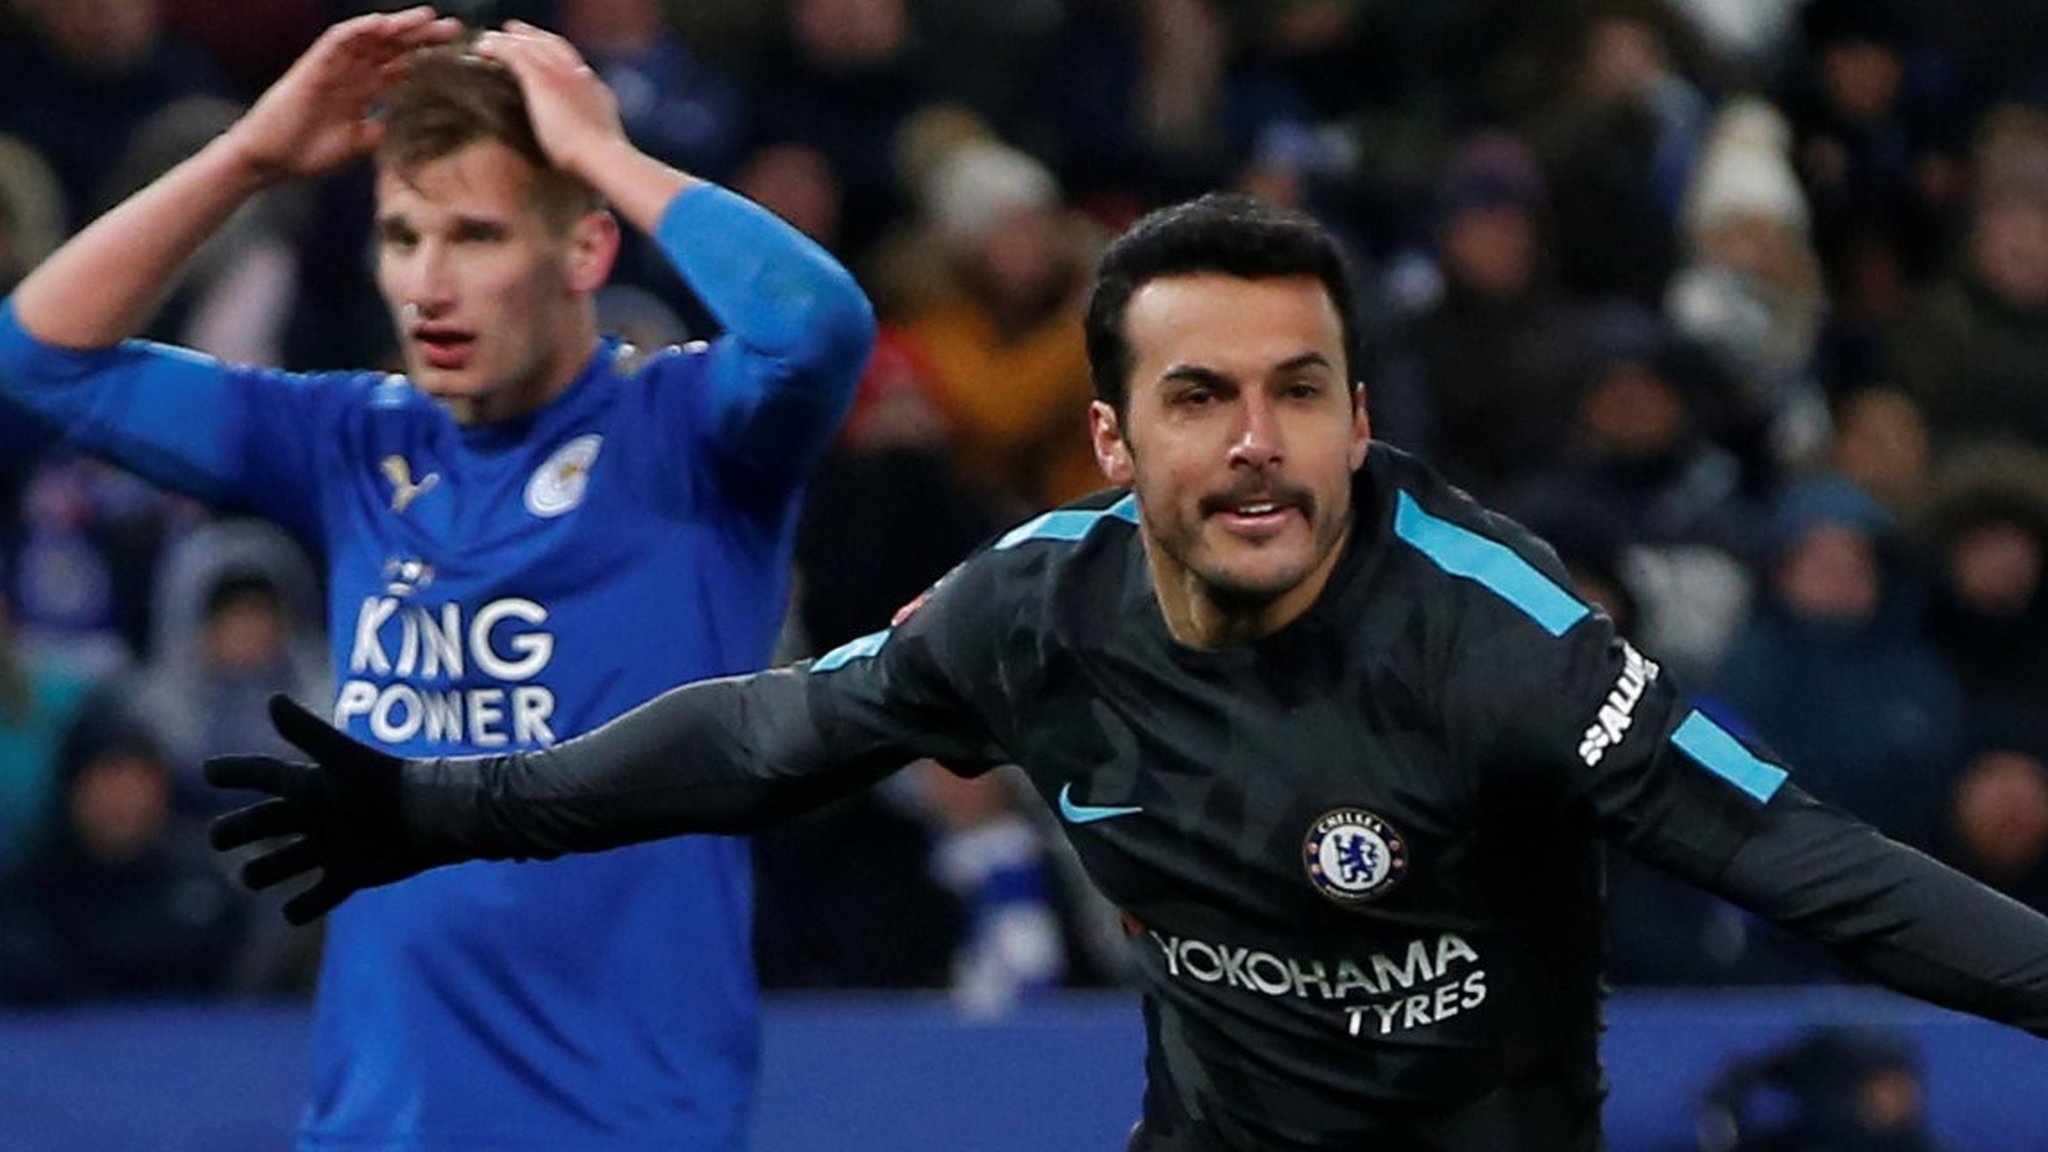 Chelsea edge past Leicester in extra time in tight cup tie